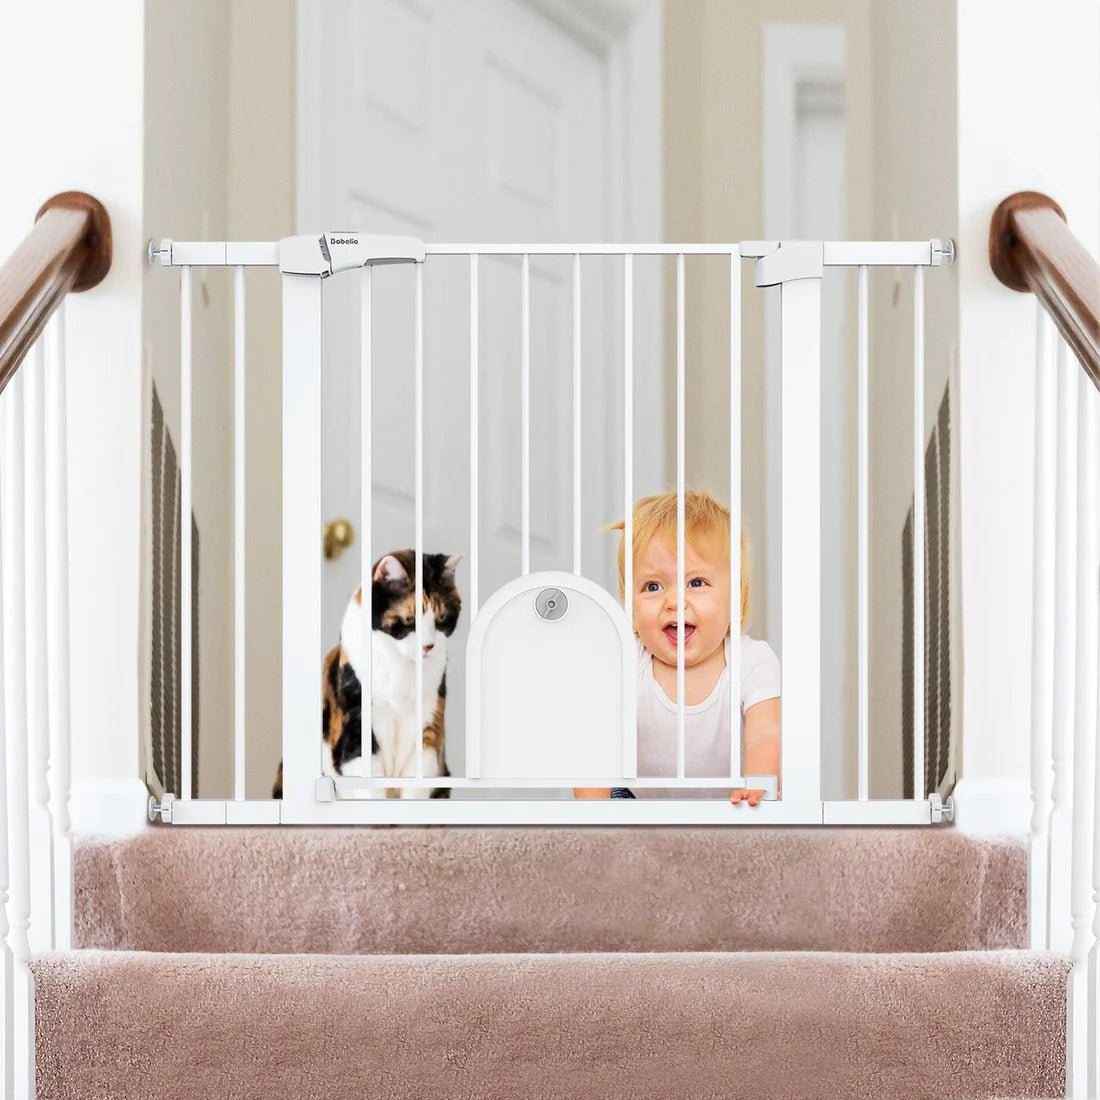 Ensure Children's Safety with Essential Measures: Are You Taking These Precautions? - babeliobaby